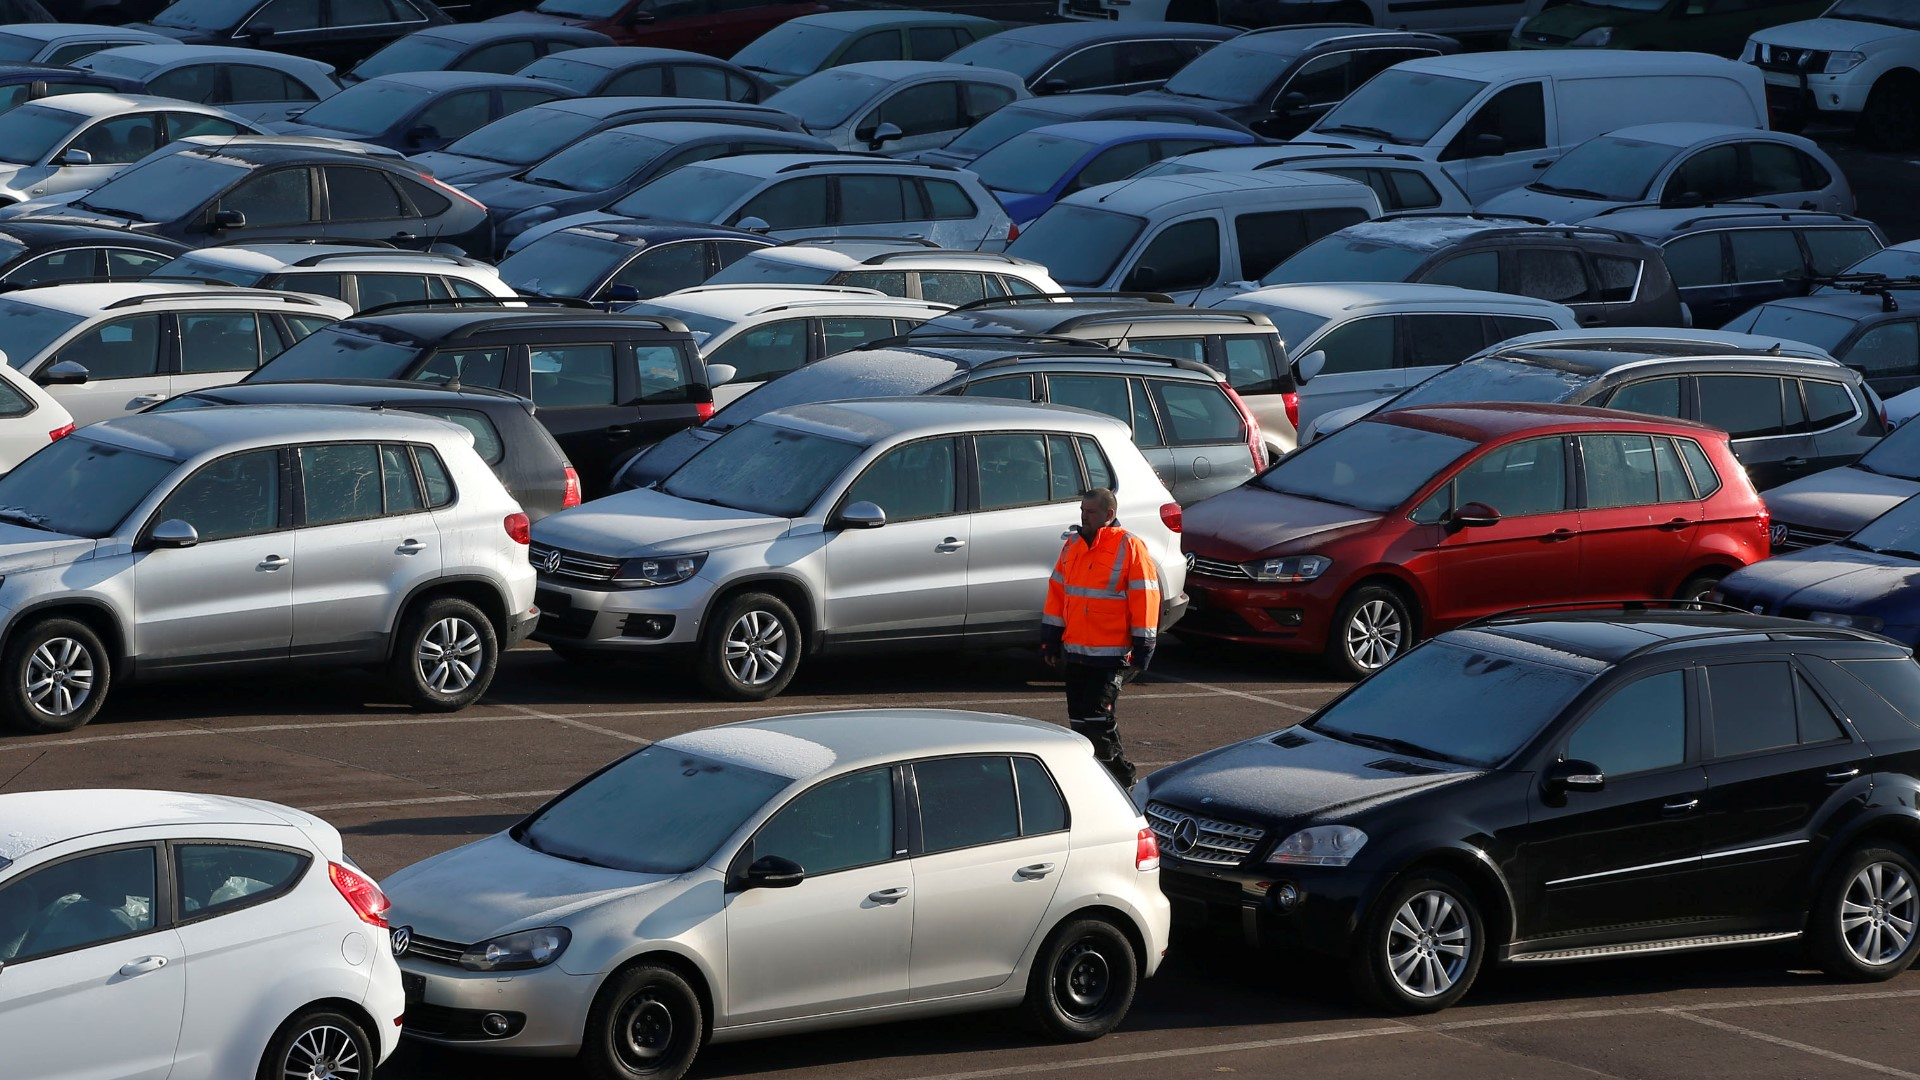 New Car Sales in The EU Fell by 5 Percent in March